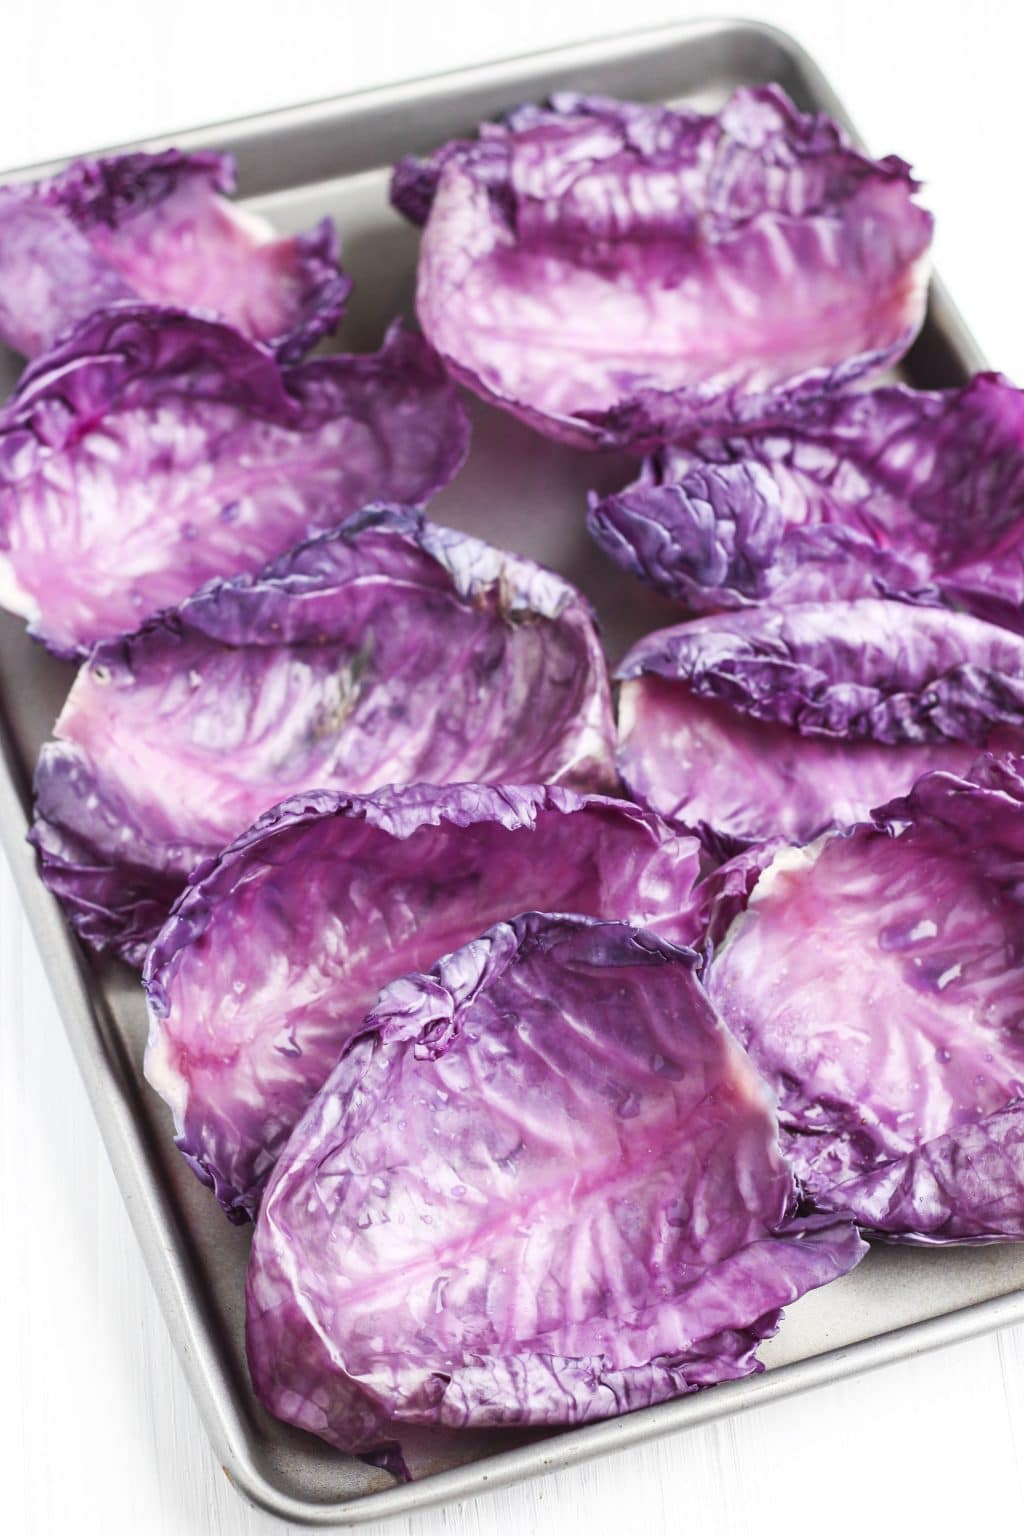 A tray full of cooked red cabbage leaves on a white background.